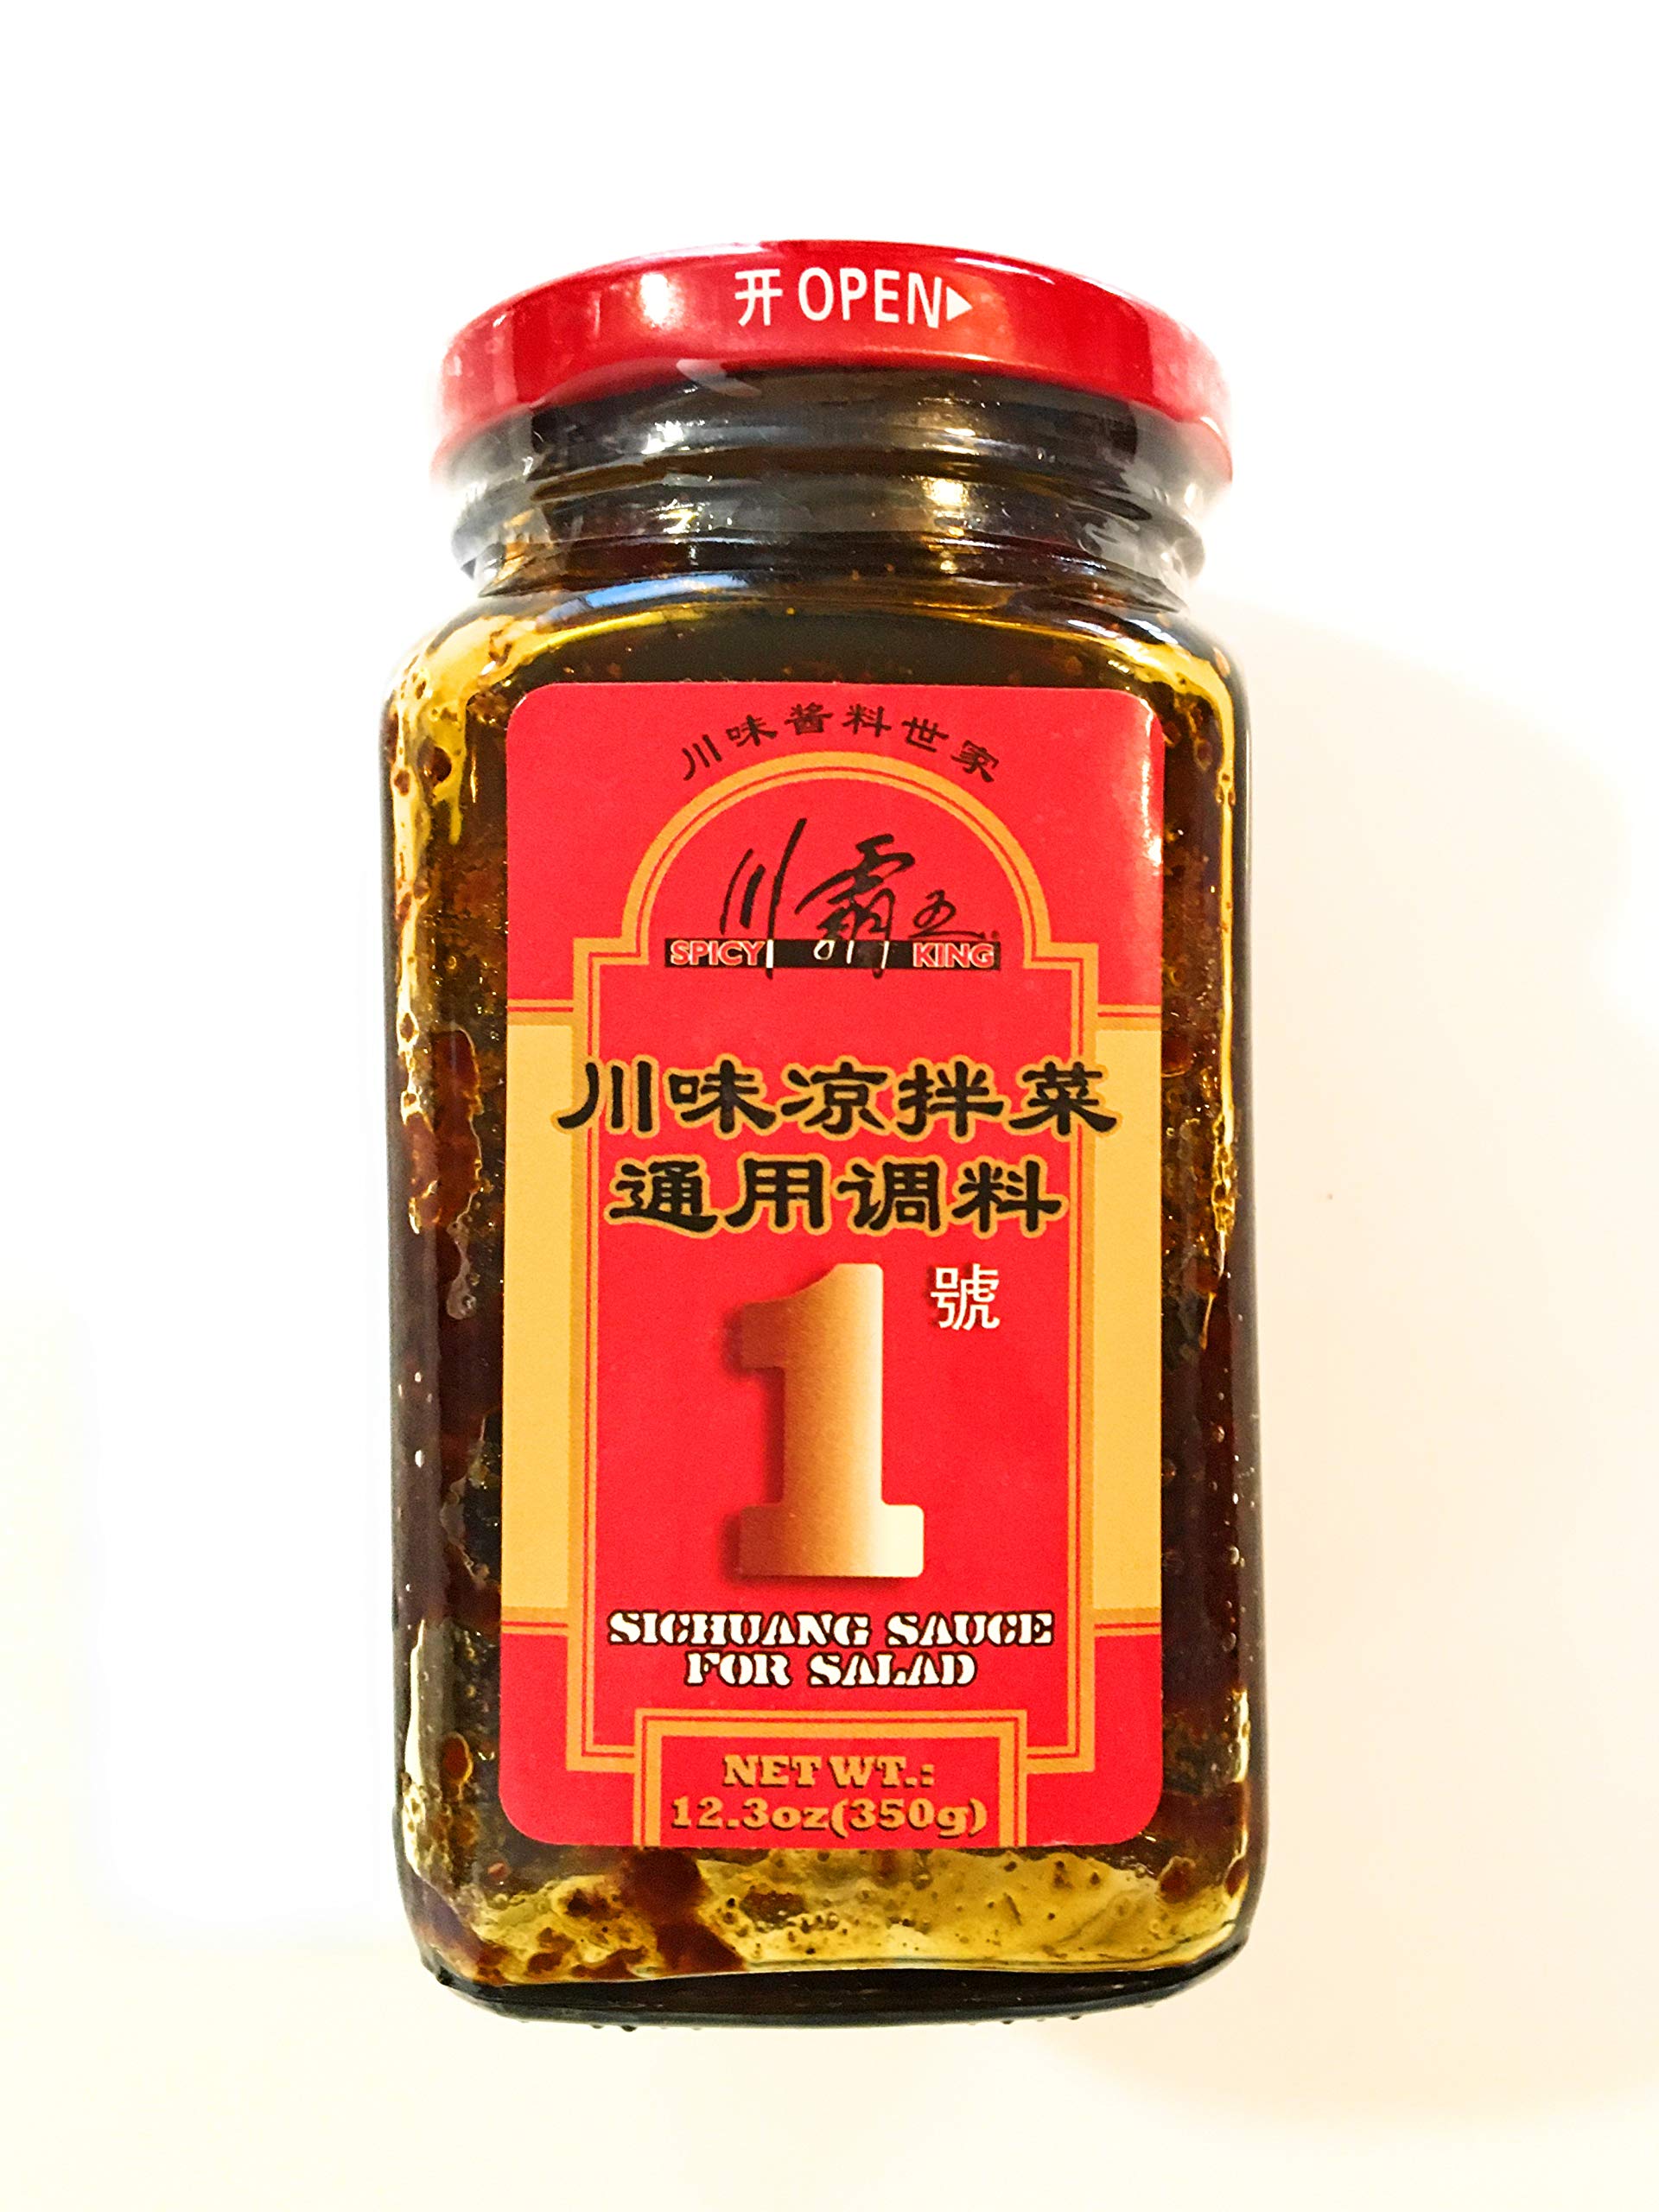 Spicy King Sichuan Sauce For Salad 12.3 Oz (2 Pack)